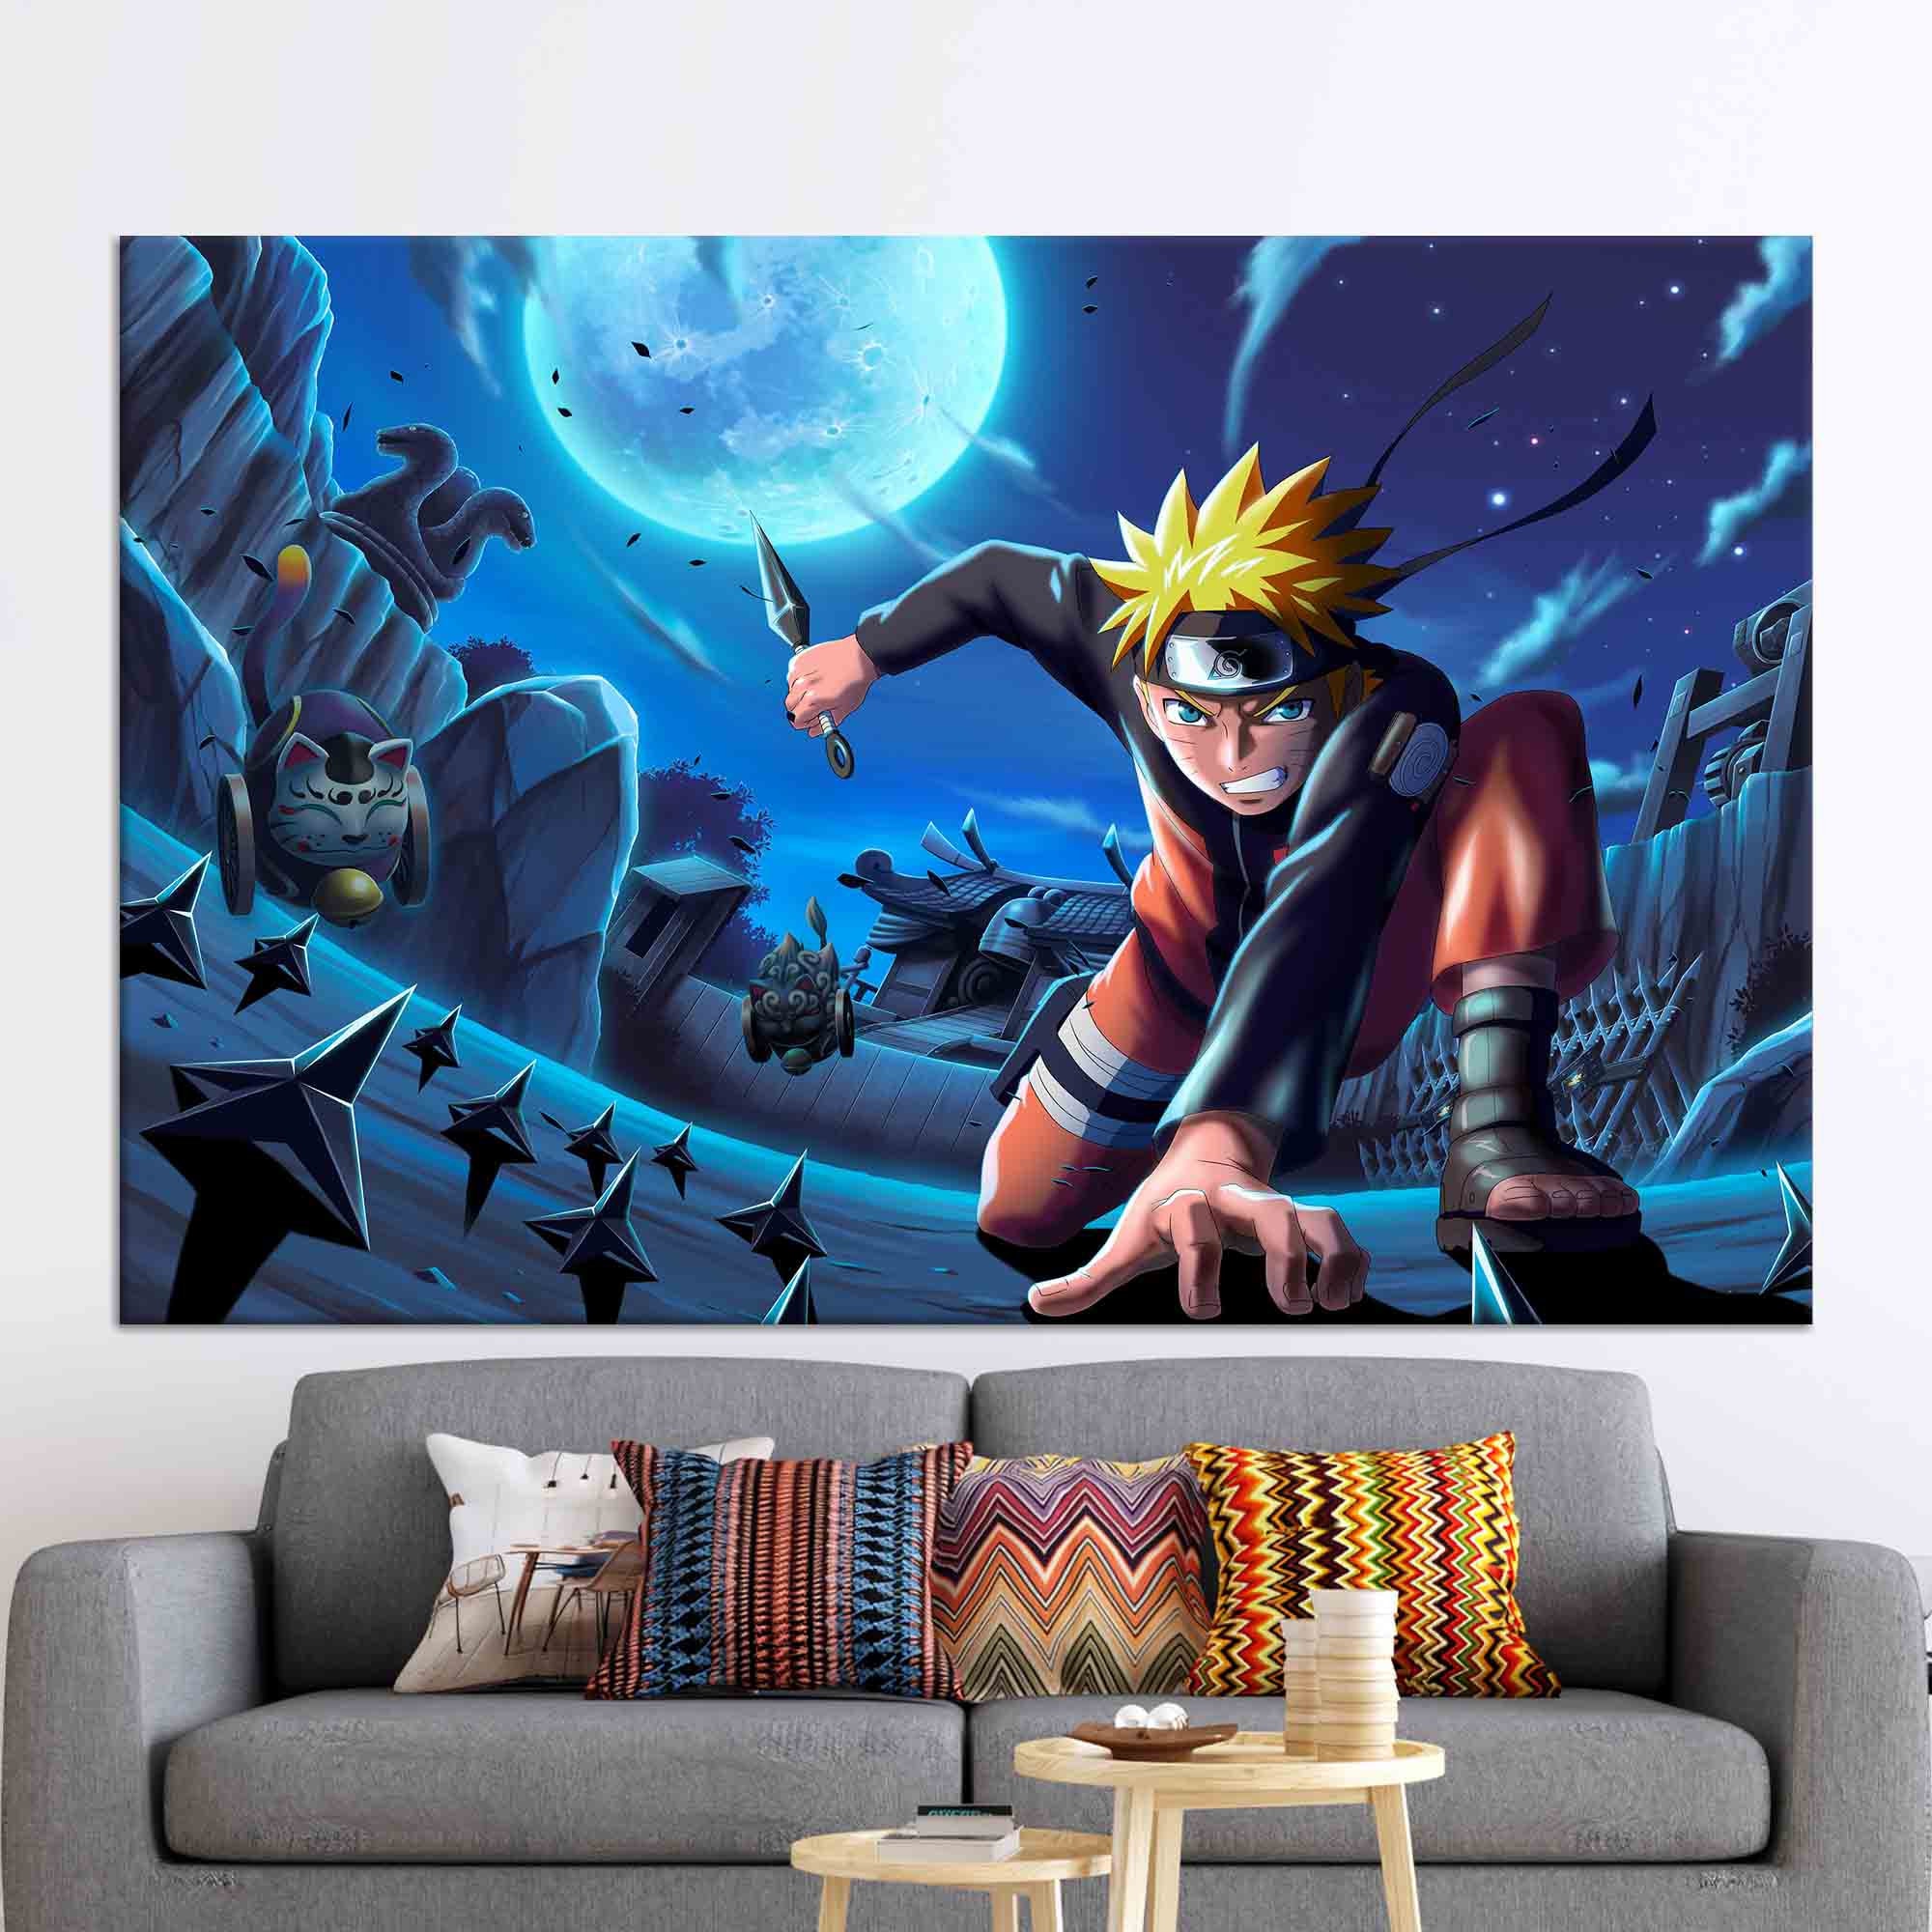 LunitasArts on Twitter Naruto 10x10 Canvas Hope you like it guys   httpstco8PxtreMh4N anime animepainting painting naruto artist  canvas art paint pintura httpstcoBq5atwf8Bk  Twitter